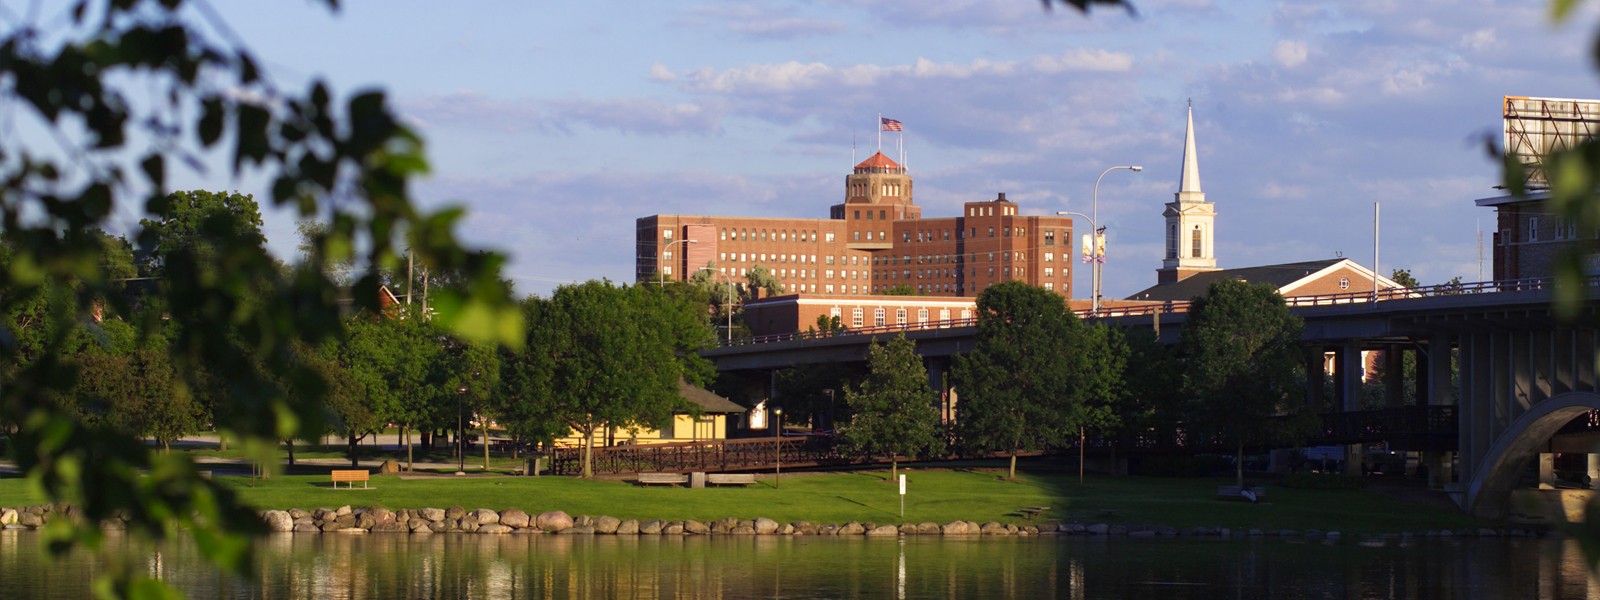 Rockford is a rapidly developing city in terms of culture and amenities. Along with a lively and exciting downtown area, Rockford residents enjoy beautiful parks, numerous sports and recreational facilities and a wide variety of retail options.